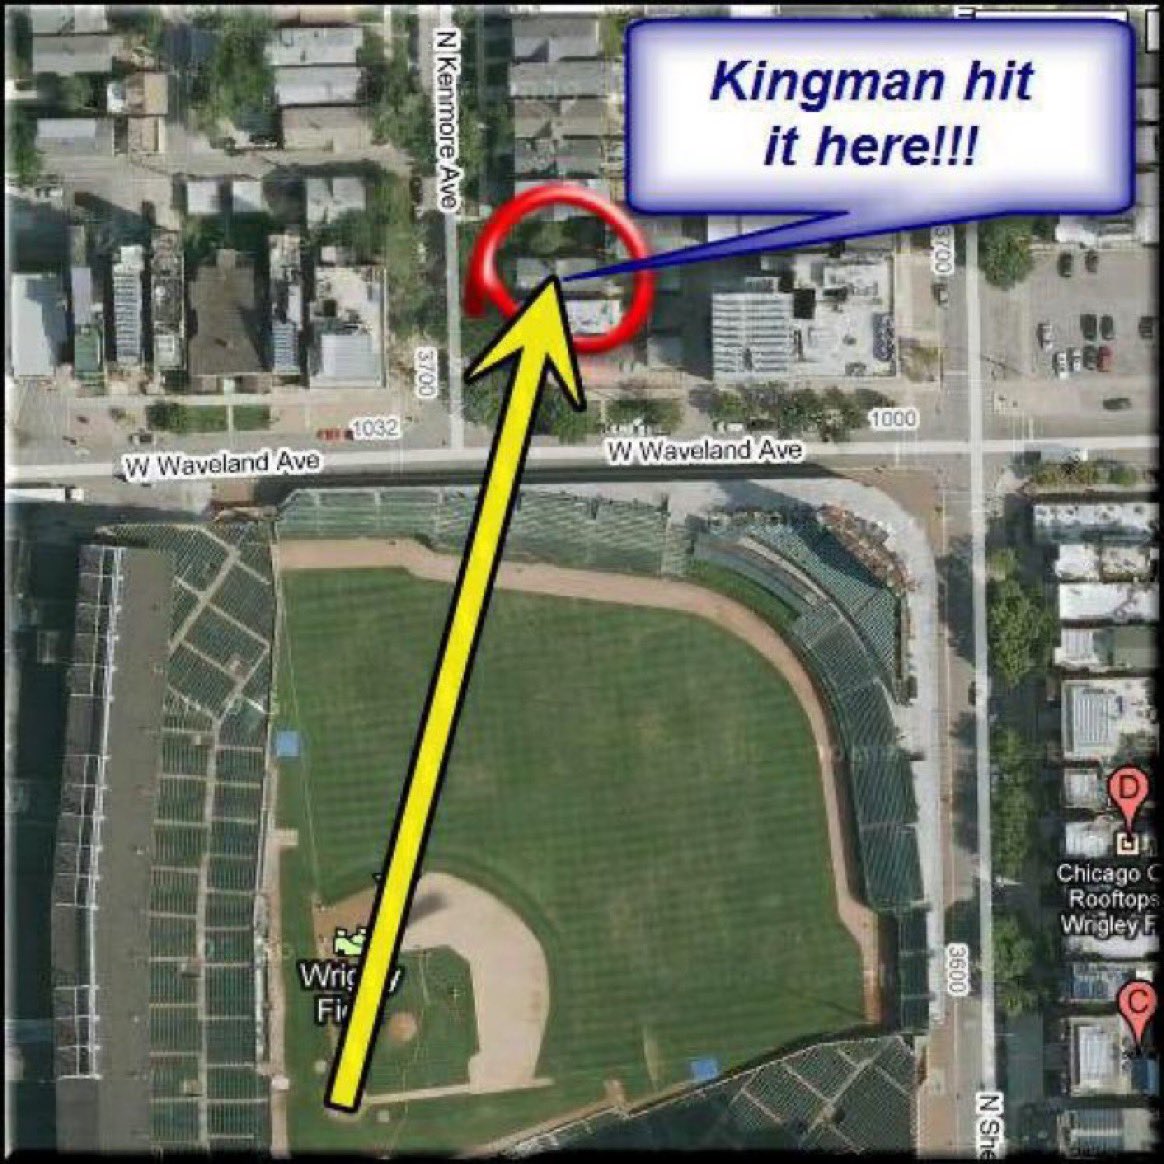 In 1976, Dave Kingman launched a moonshot at Wrigley Field that landed on a porch roof three houses down Kenmore Ave. I’ve stood in front of that house and you wouldn’t believe a human being could hit a baseball that far on the fly.